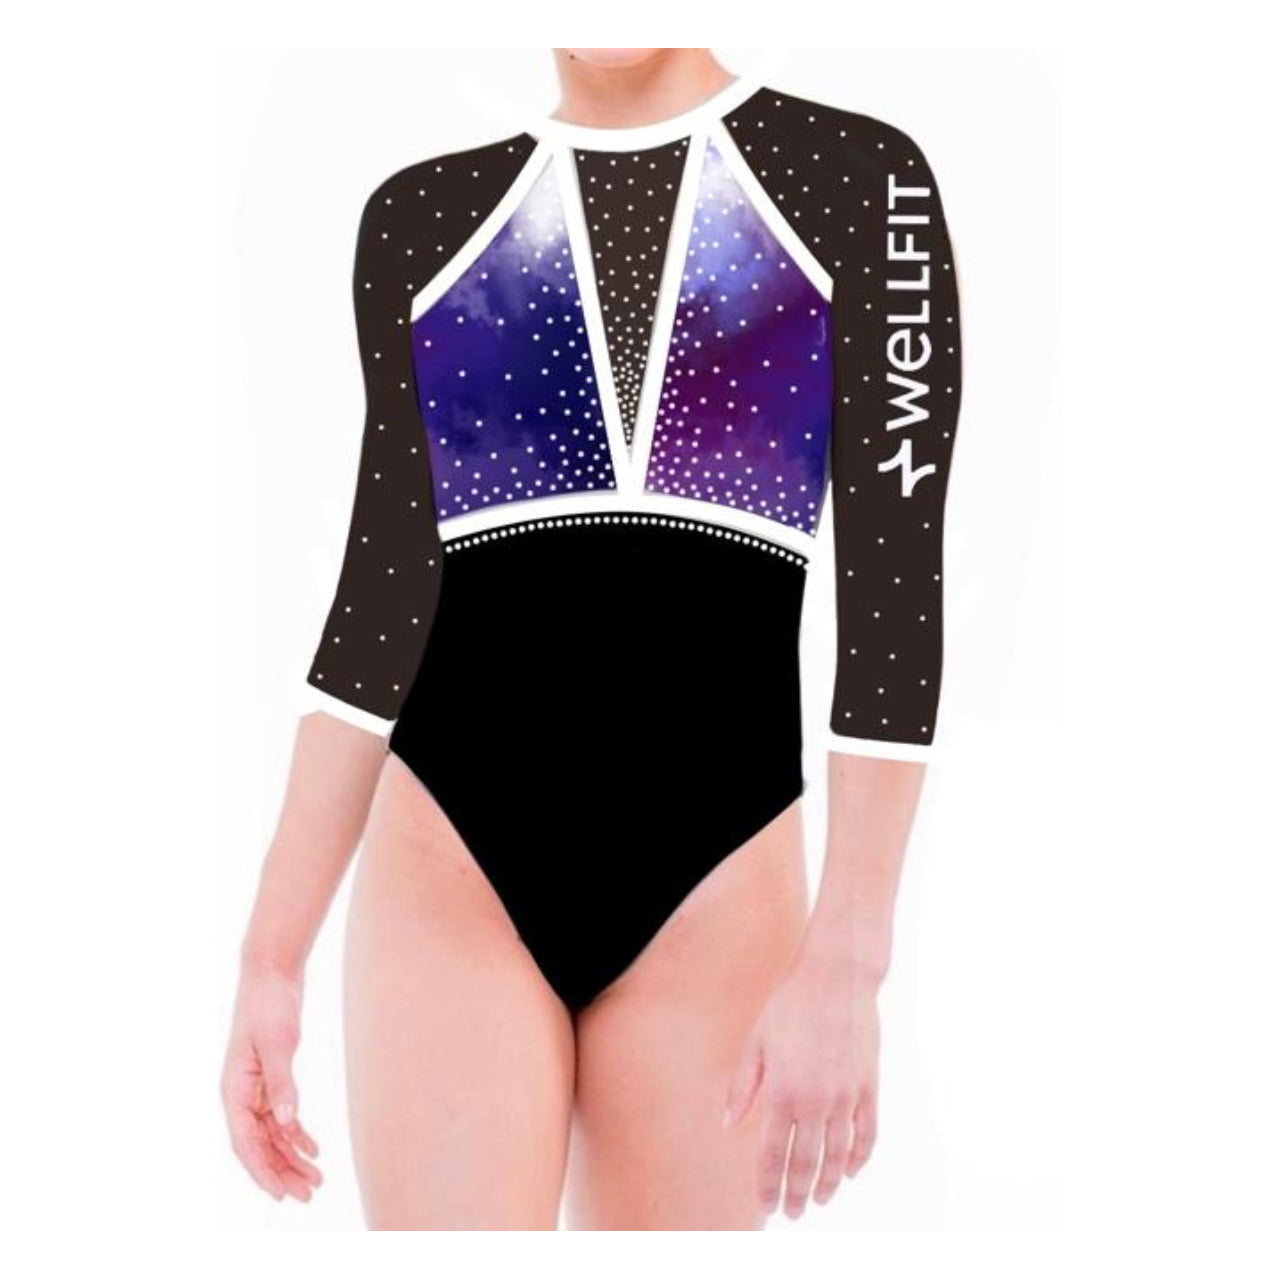 Gymnastics Competition (Girls Competition Leotard), 6 - 18 years